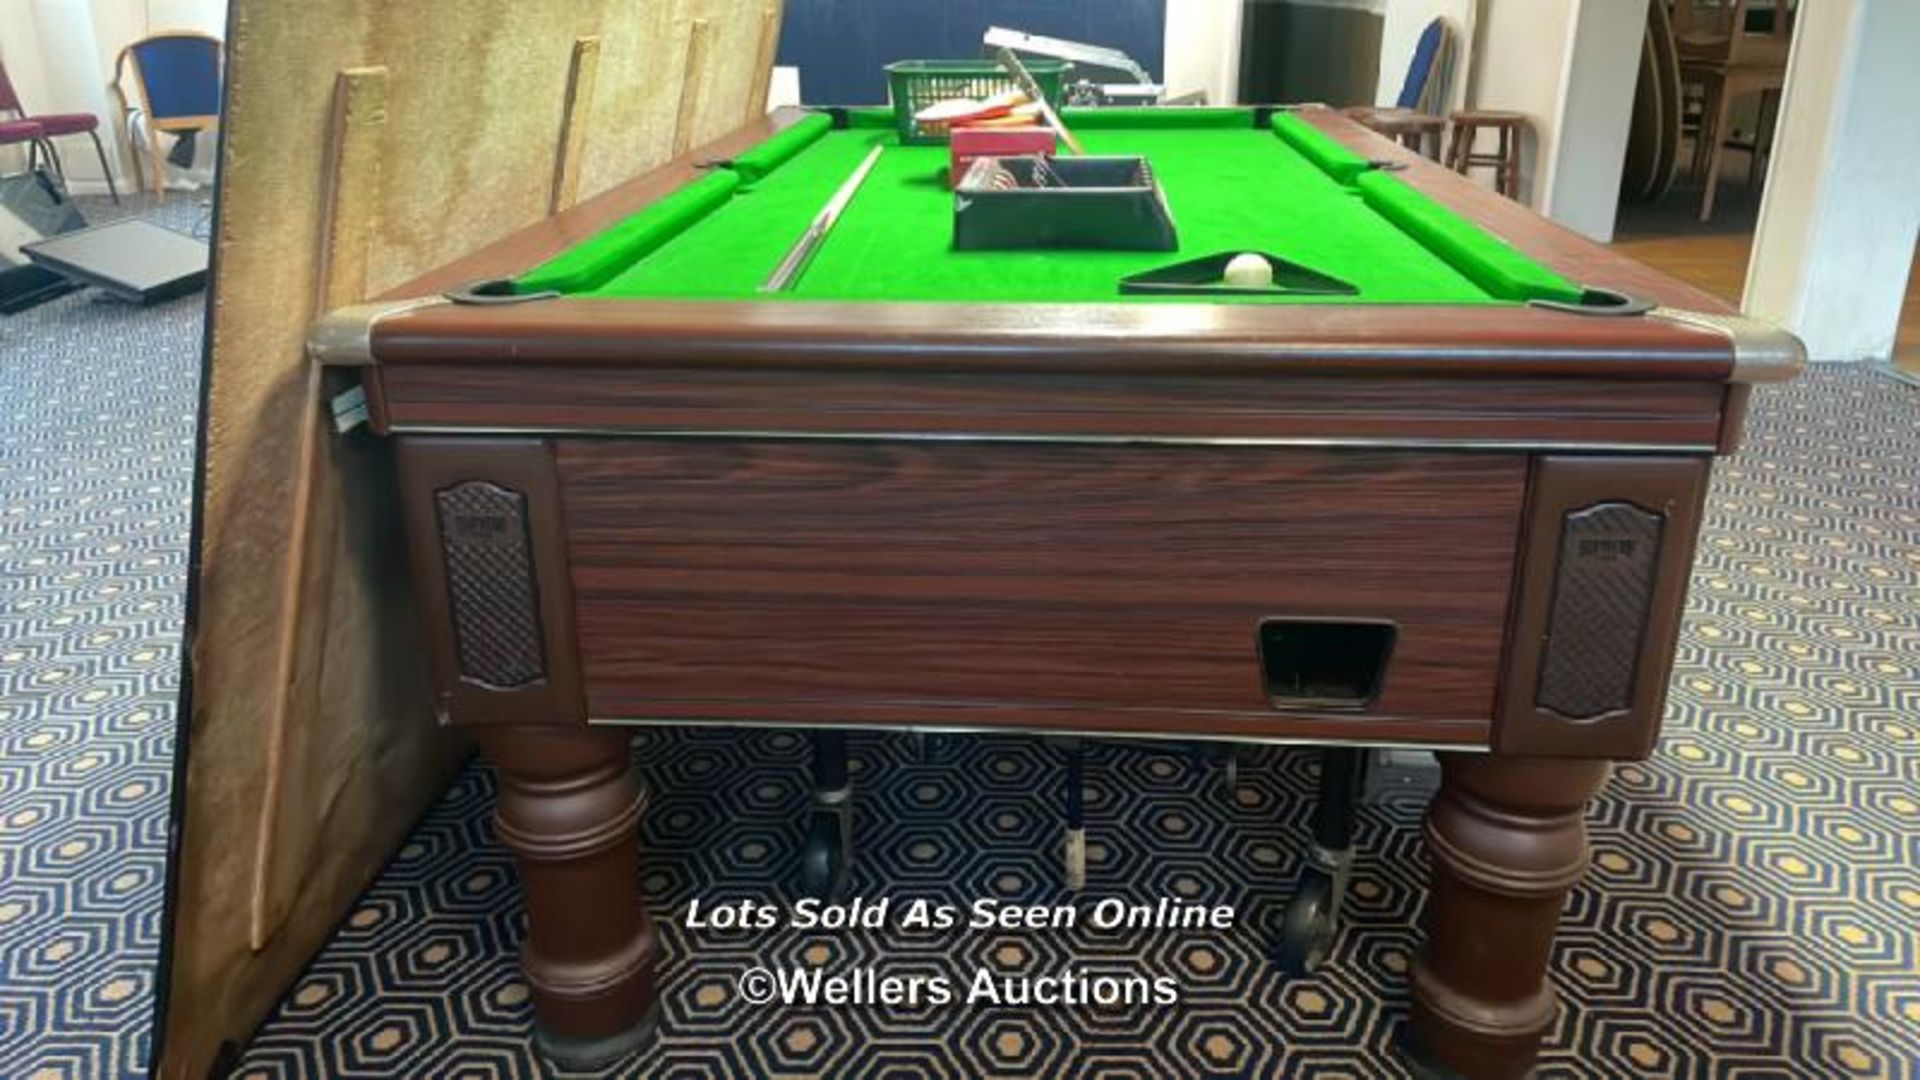 SUPREME POOL STANDARD SIZED POOL TABLE, RECENTLY REFELTED, INCLUDES BALLS, LIGHT, WALL MOUNTED CUE - Image 7 of 8